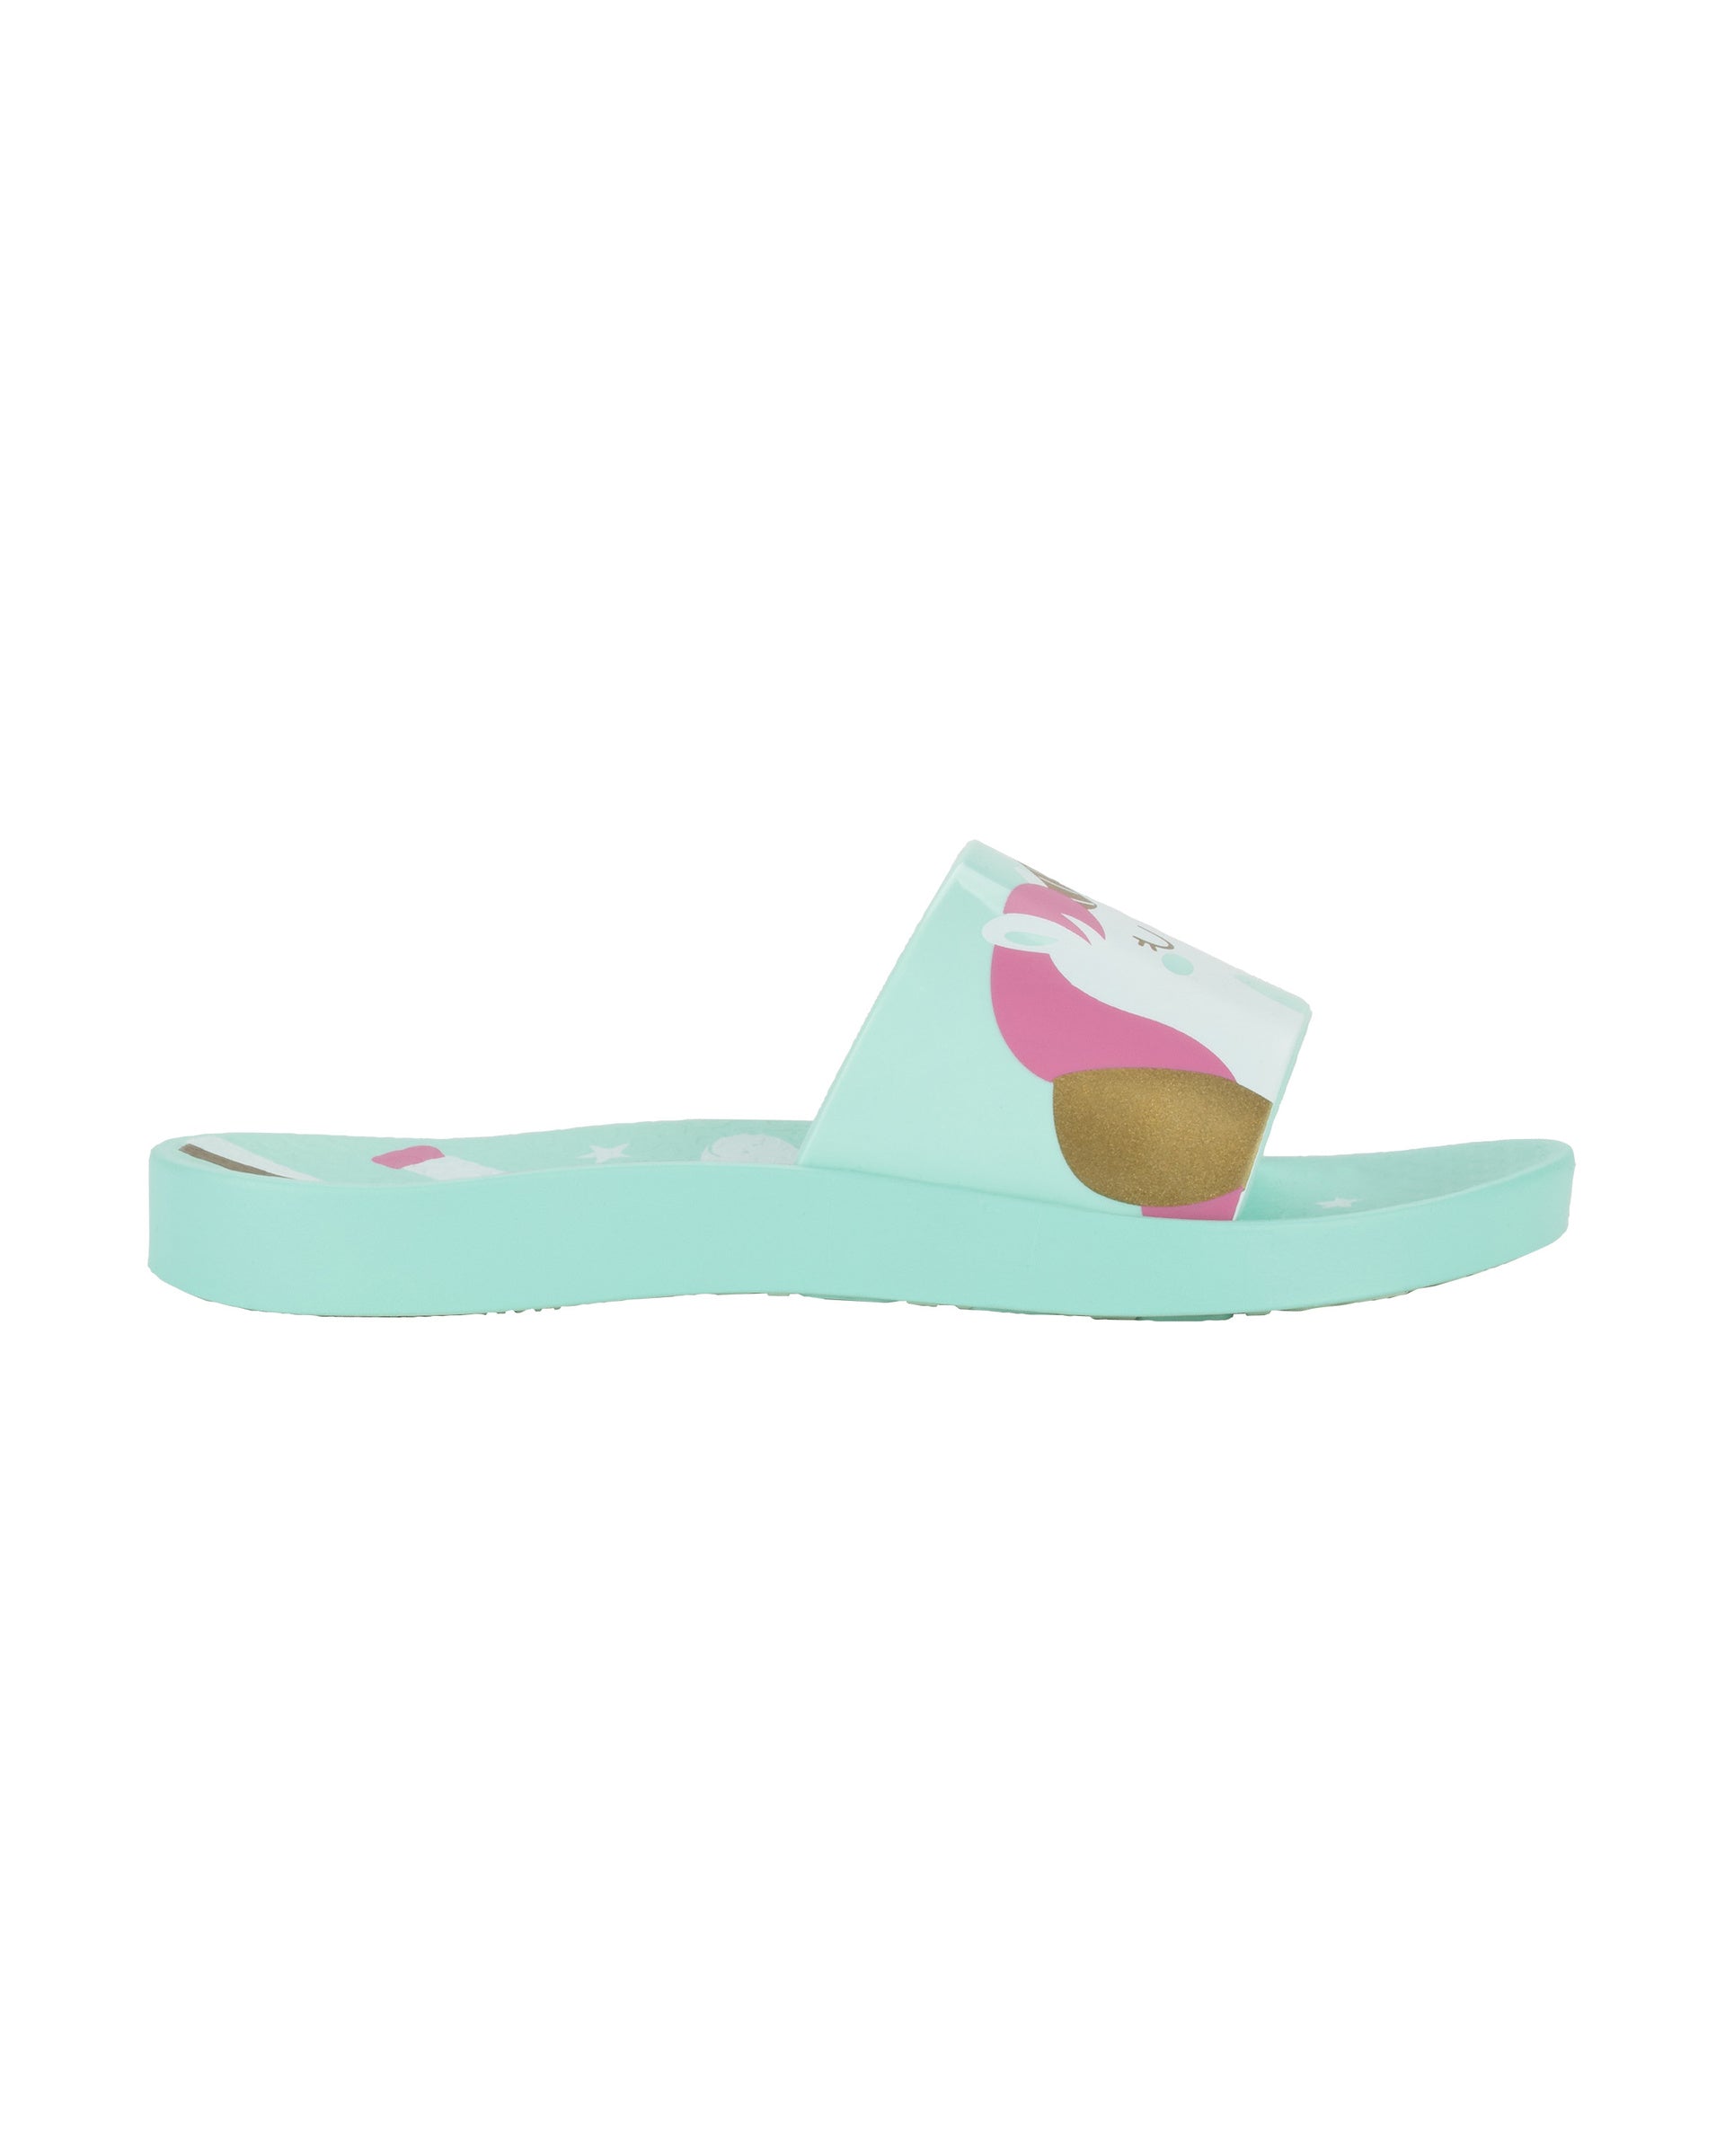 Outer side view of a green Ipanema Urban kids slide with a unicorn on the upper.